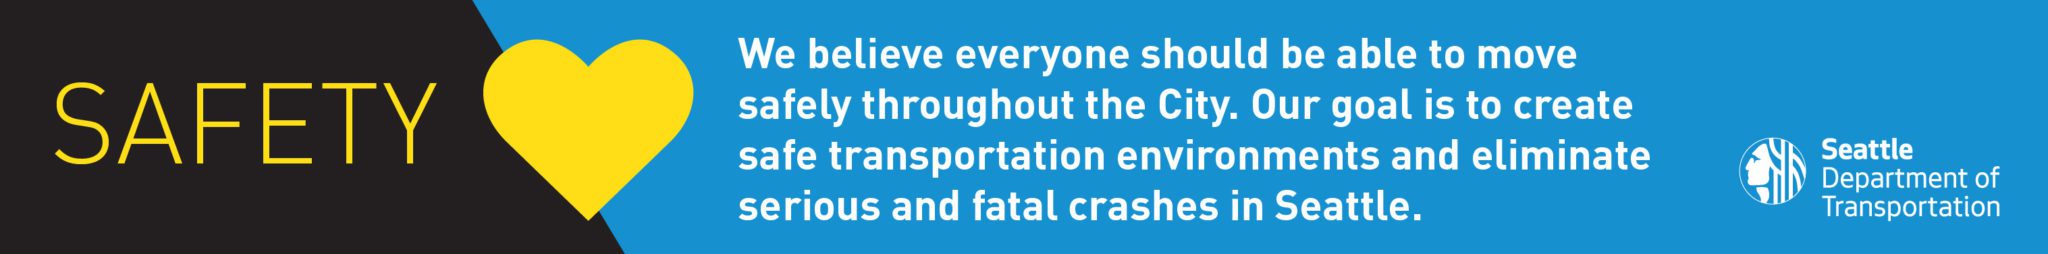 Safety: We believe everyone should be able to move around the city safely.  Our goal is to create safe transportation environments and eliminate serious and fatal accidents in Seattle.